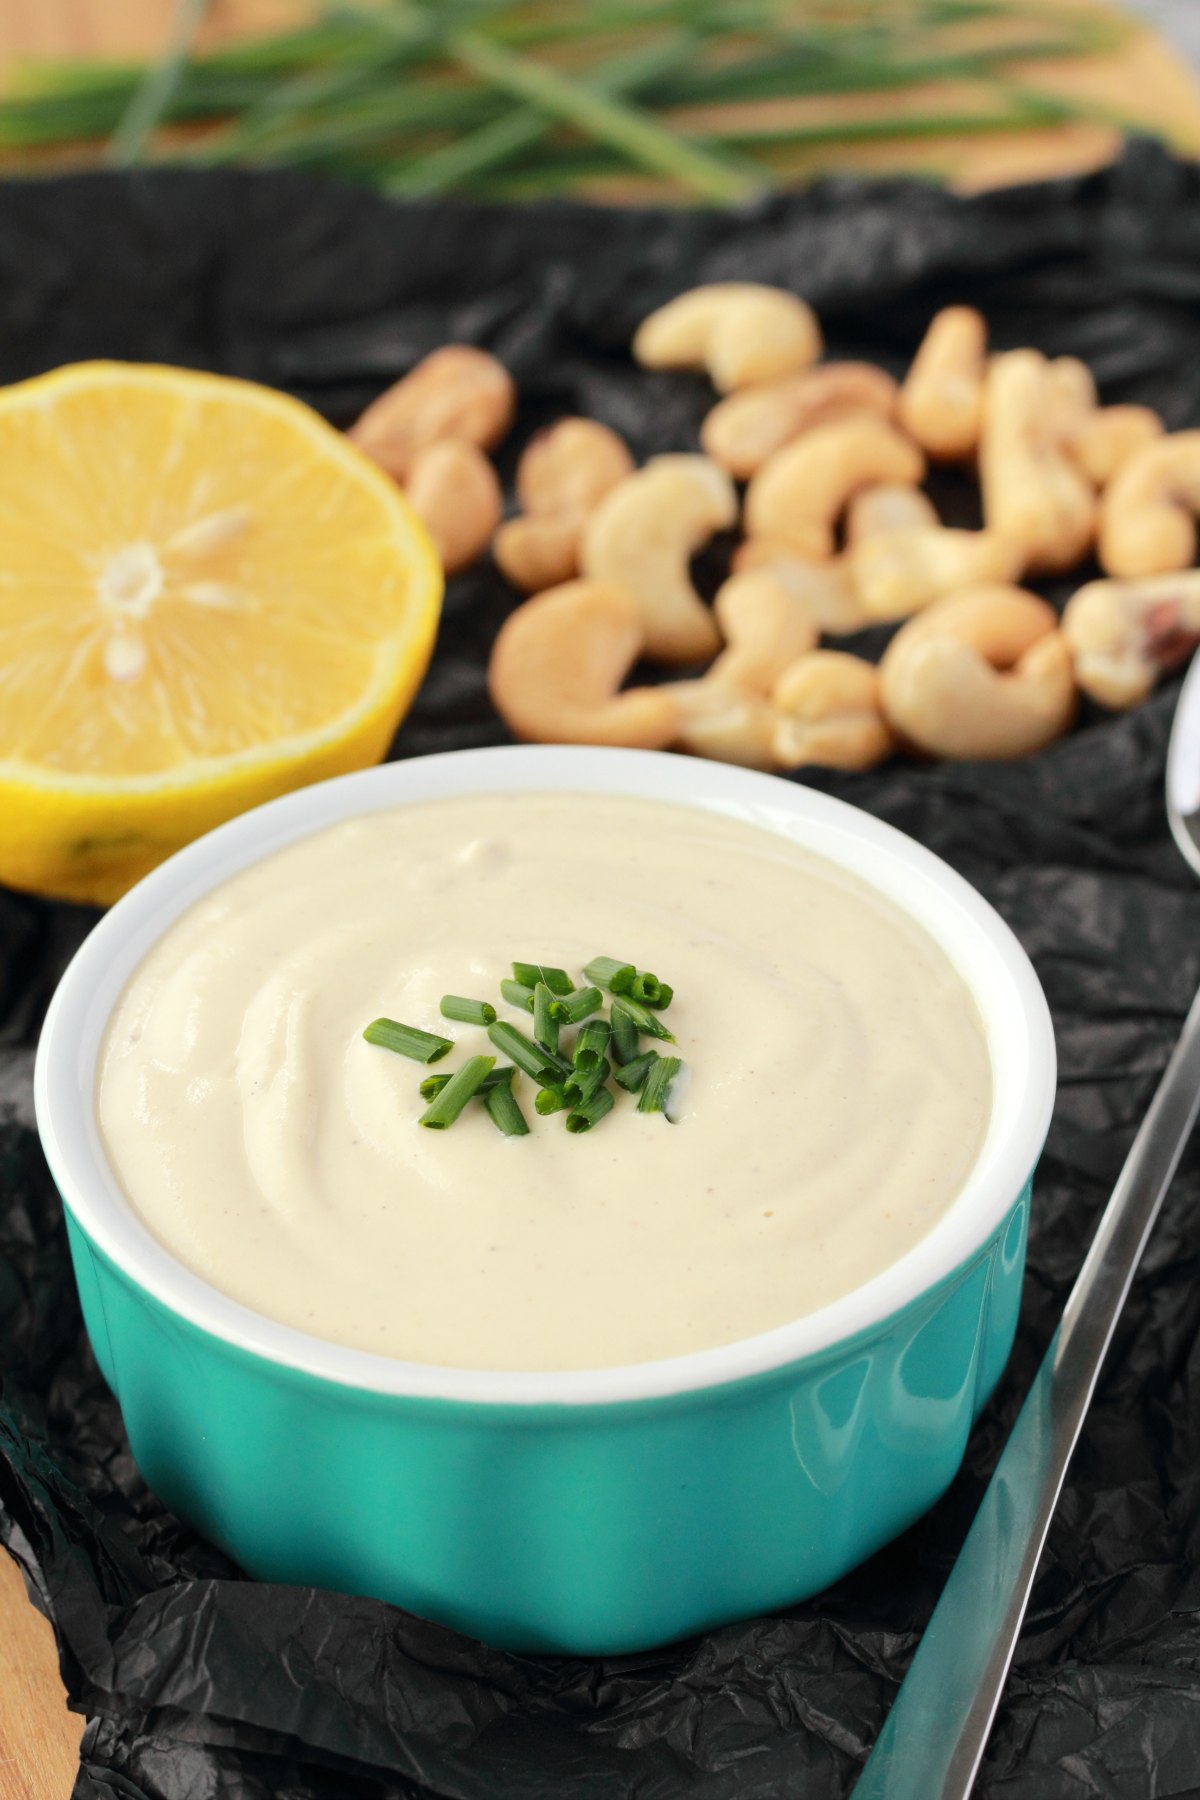 Cashew cream in a turquoise and white ramekin with chopped chives on top. Half a lemon, cashews and chives are in the background. 